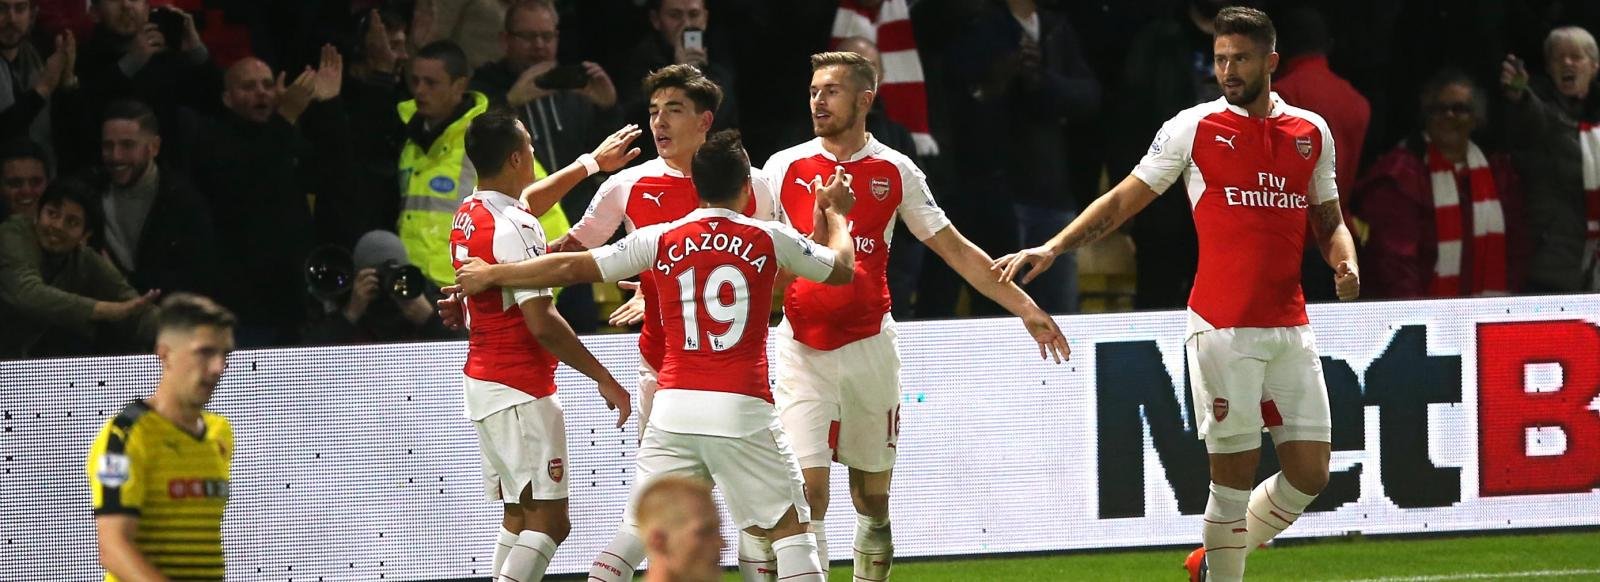 History suggests only Arsenal can challenge Man City for the title